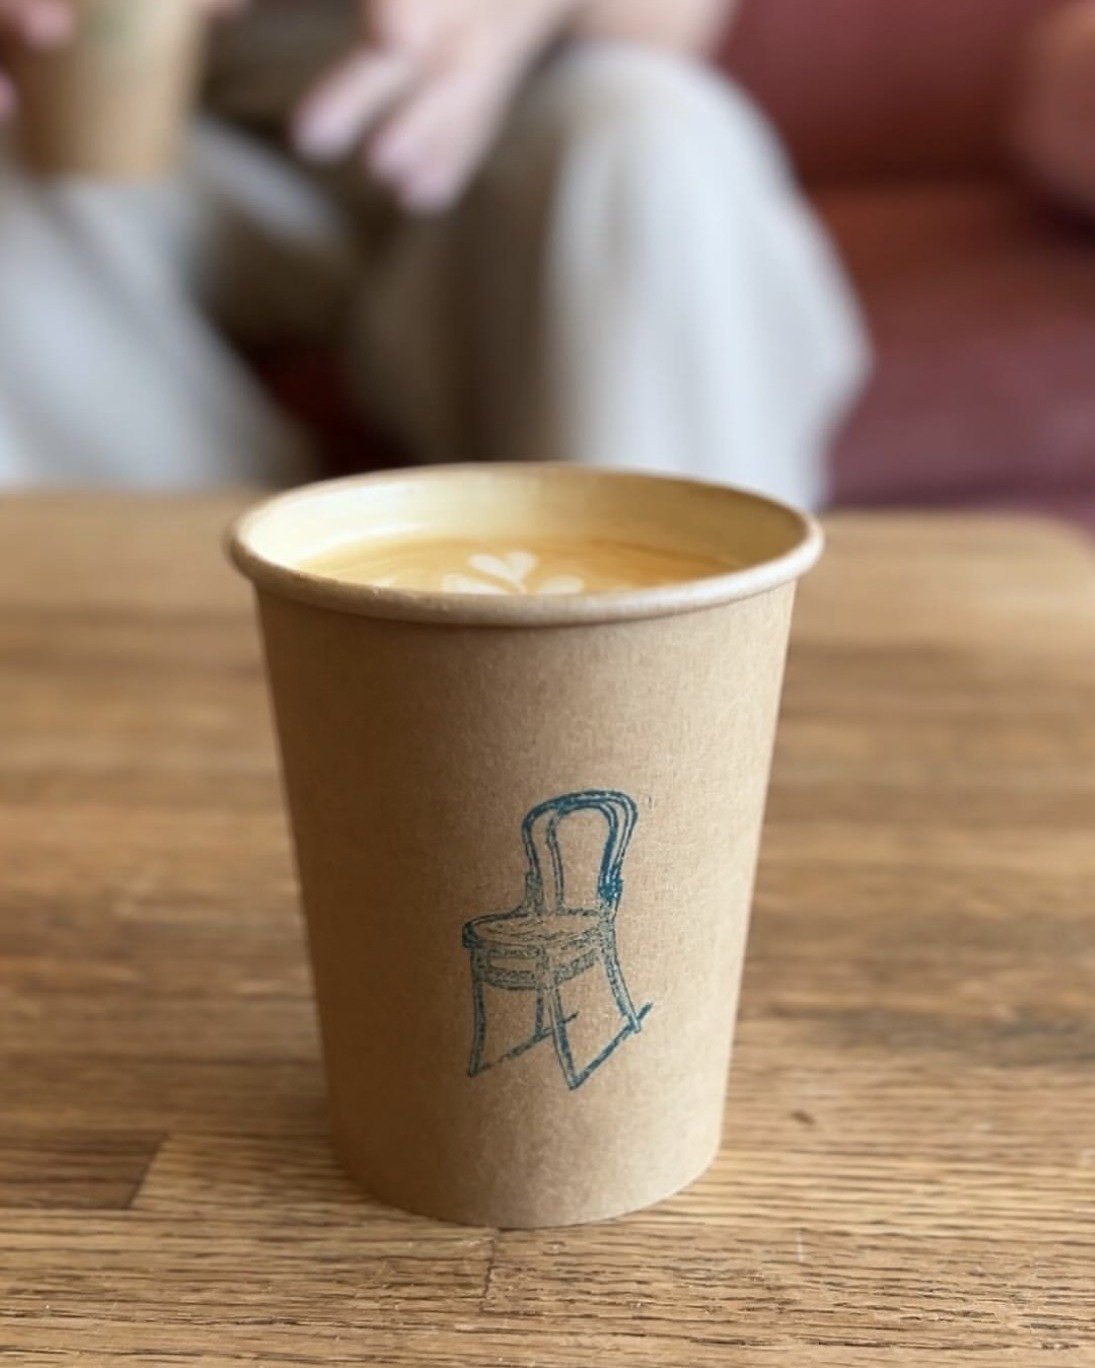 The NEWEST coffee spot in the district: @folkstoneslowbar located inside @thefuzzyneedle ☕ 

Trying out a new coffee bar in a record, book &amp; vintage store this morning sounds like the PERFECT way to start the weekend to us. Folkstone Slow Bar is 